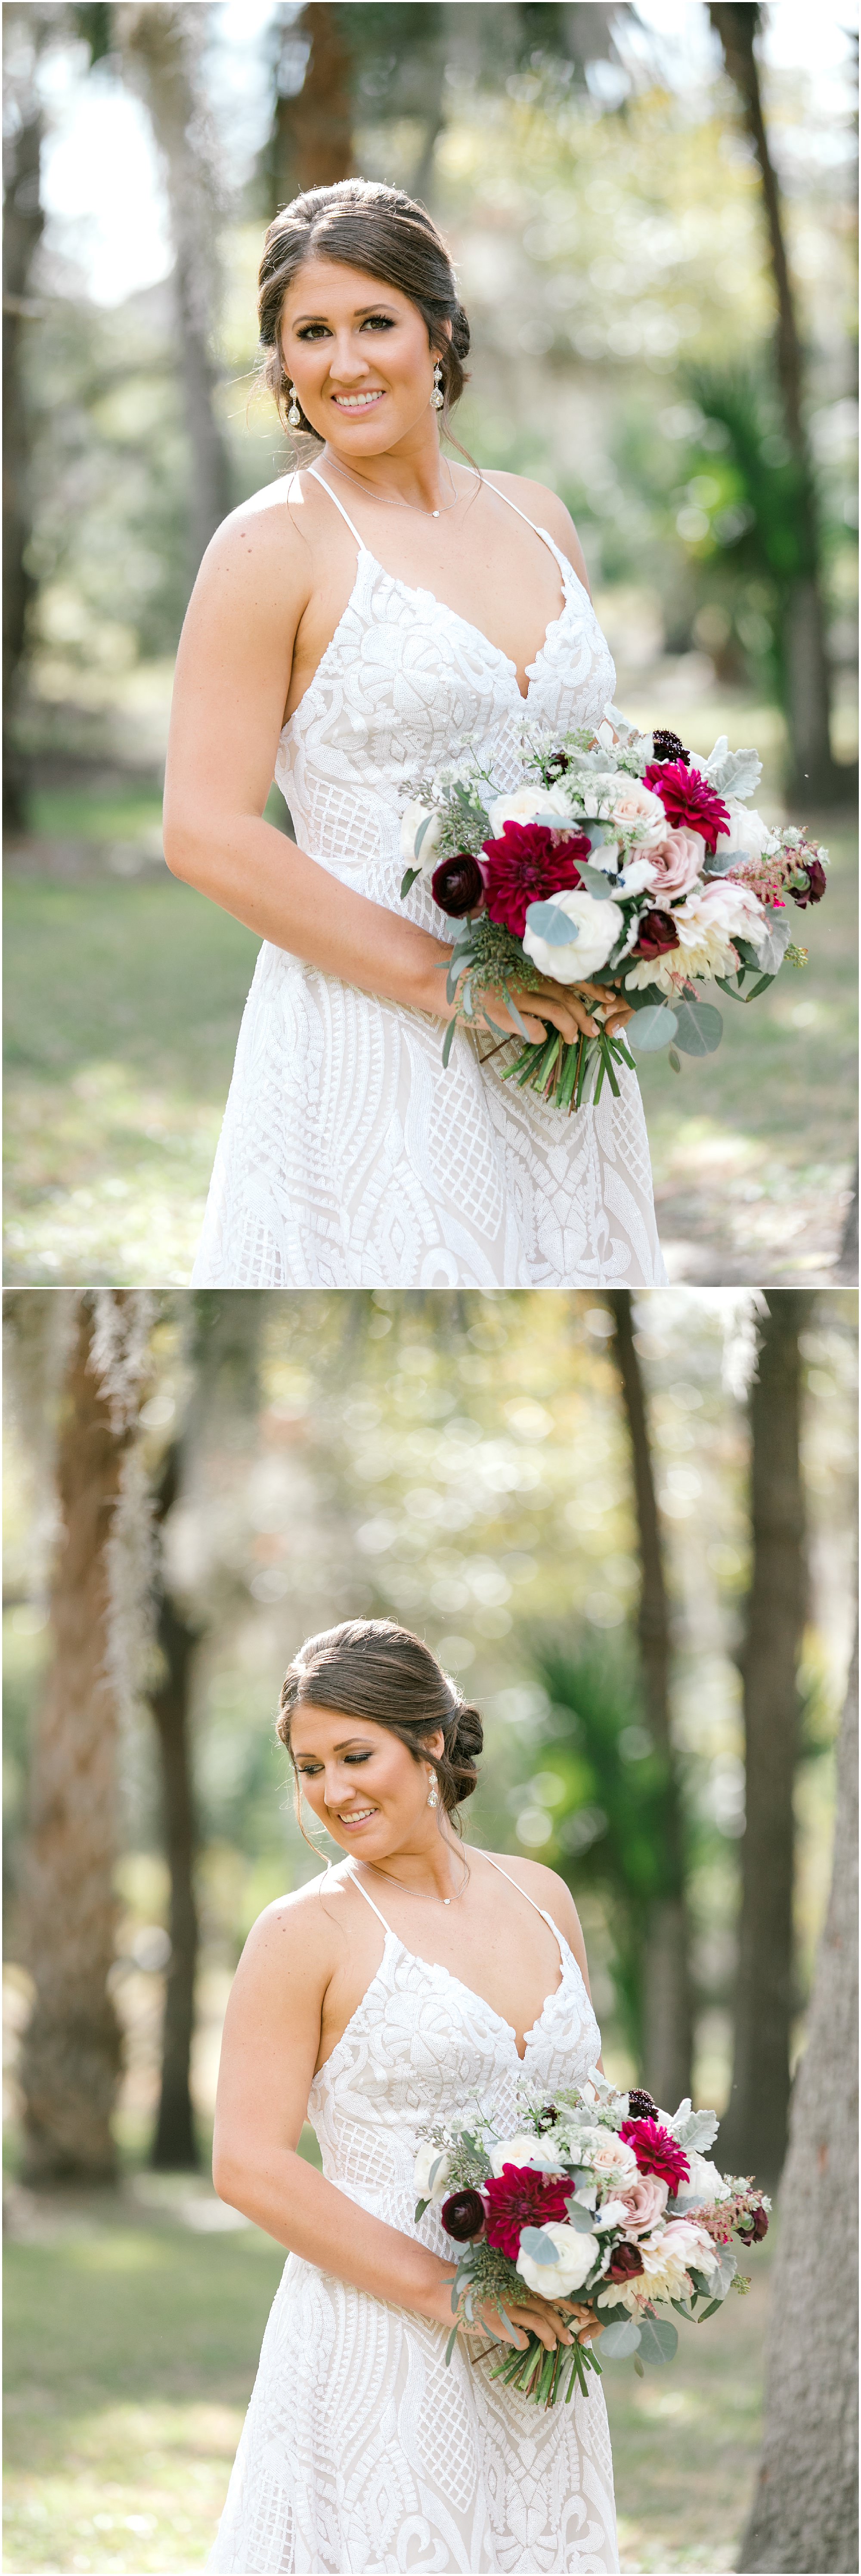 Bride in dusty rose dress holding her bouquet with burgundy color flowers